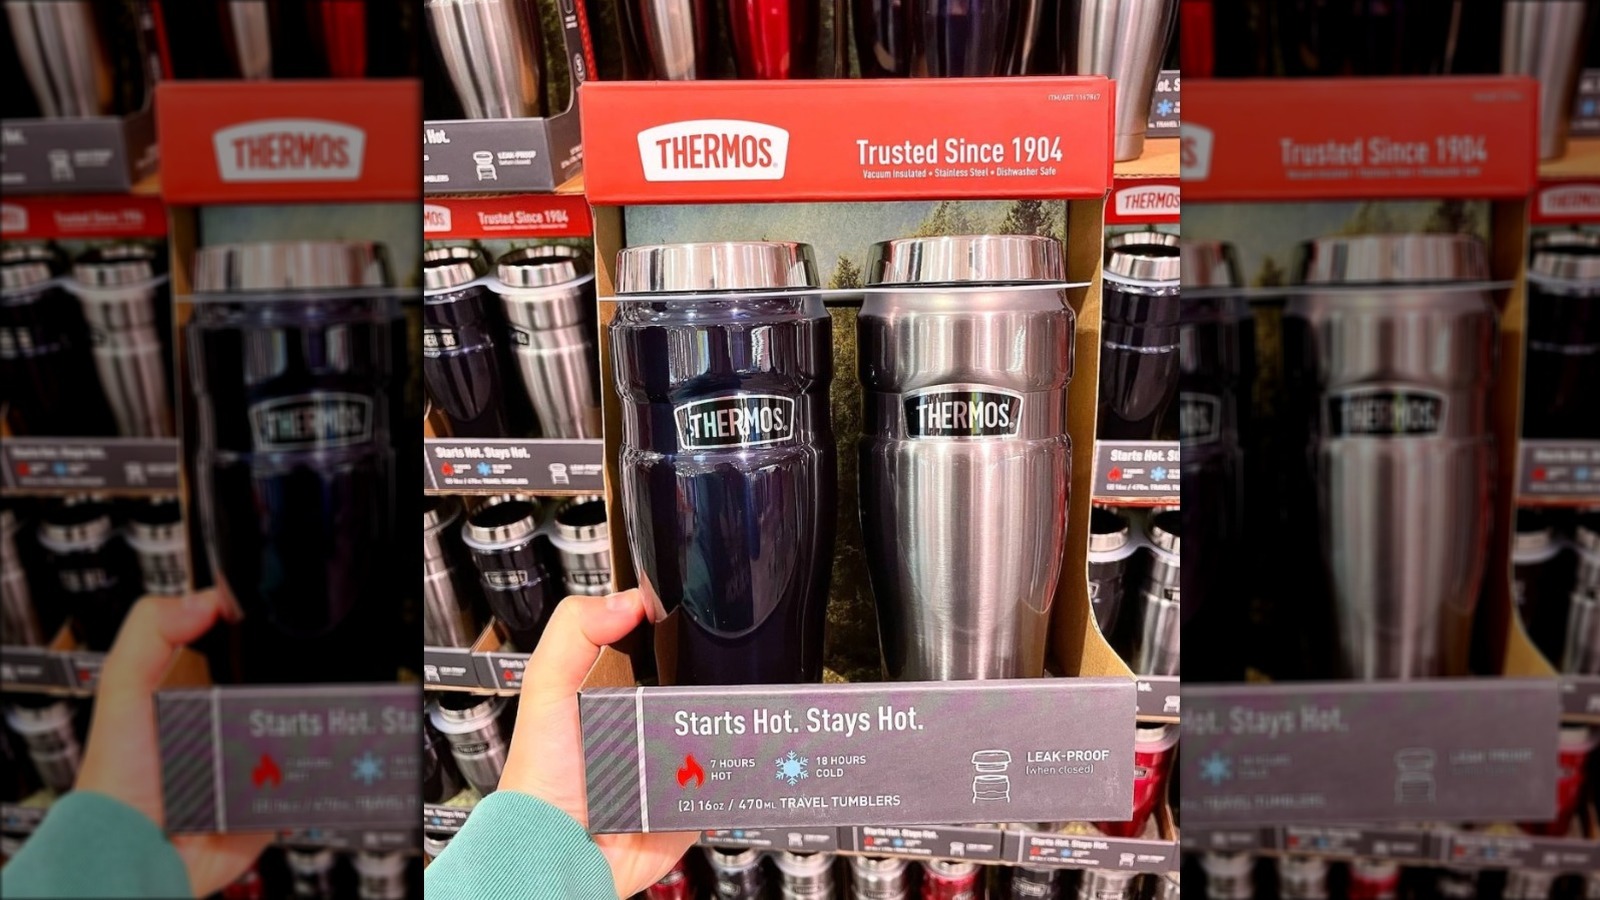 https://www.mashed.com/img/gallery/this-thermos-pack-at-costco-is-a-total-steal/l-intro-1607620790.jpg